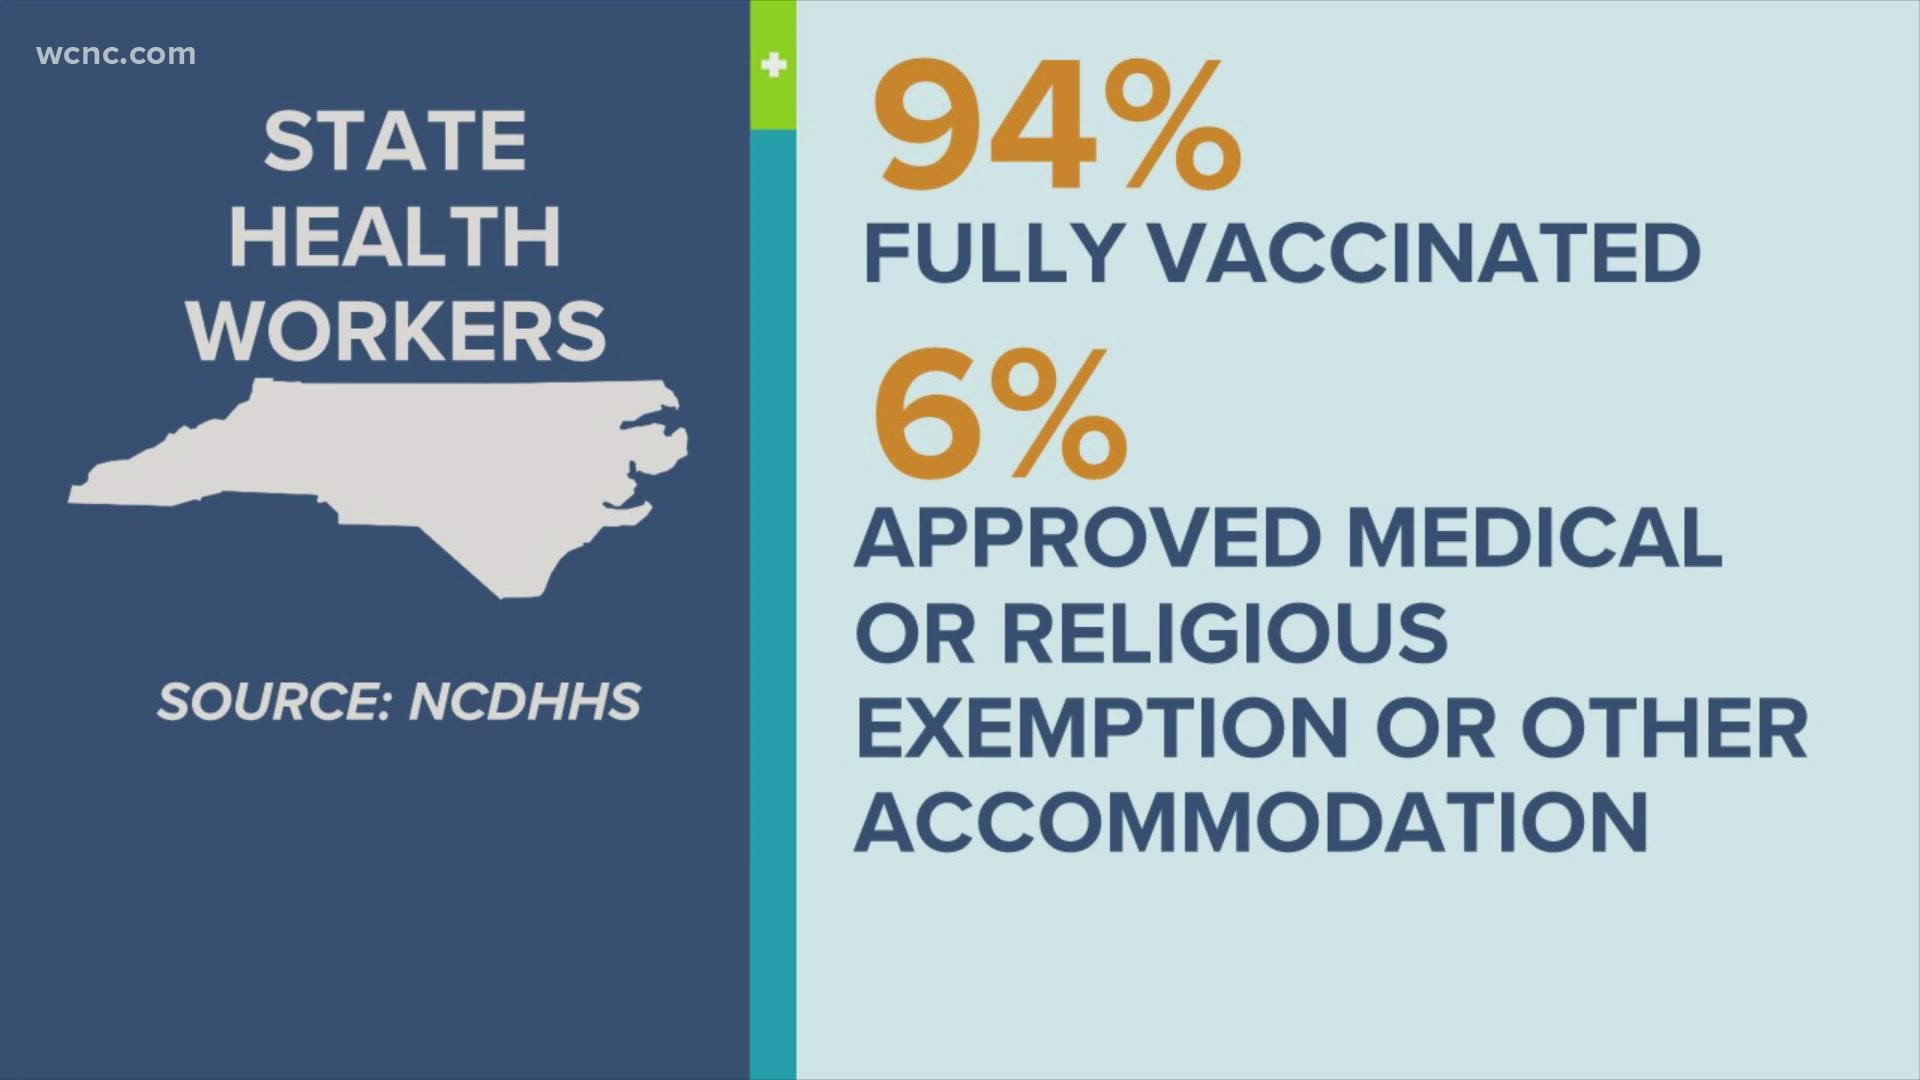 Officials say 94% of the health workforce is fully vaccinated. The 6% of workers left got an approved medical or religious exemption or a special accommodation.